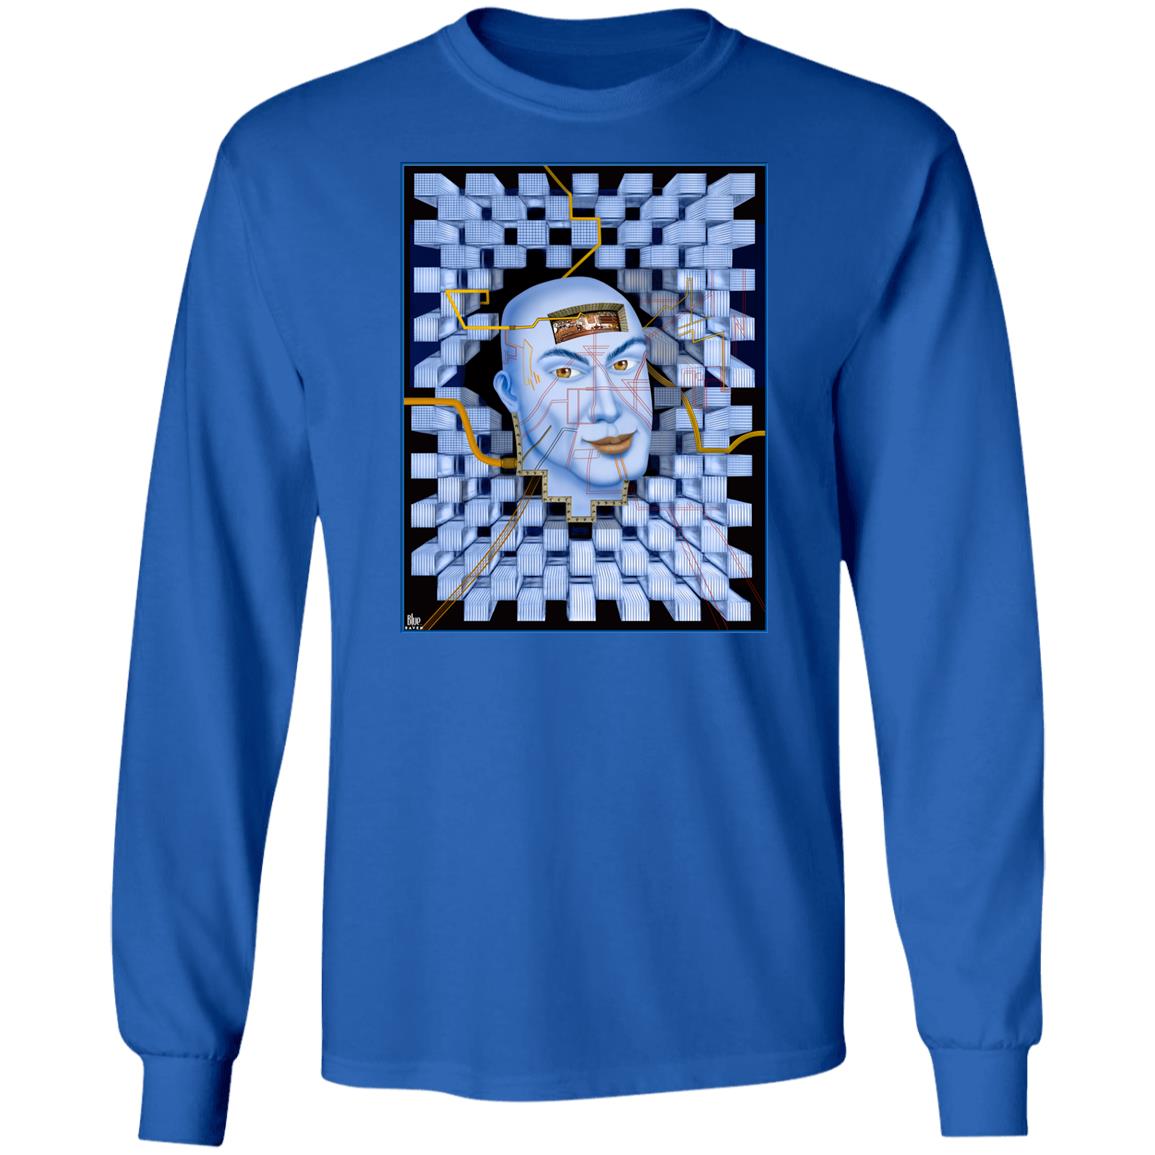 Plugged In - Men's Long Sleeve T-Shirt